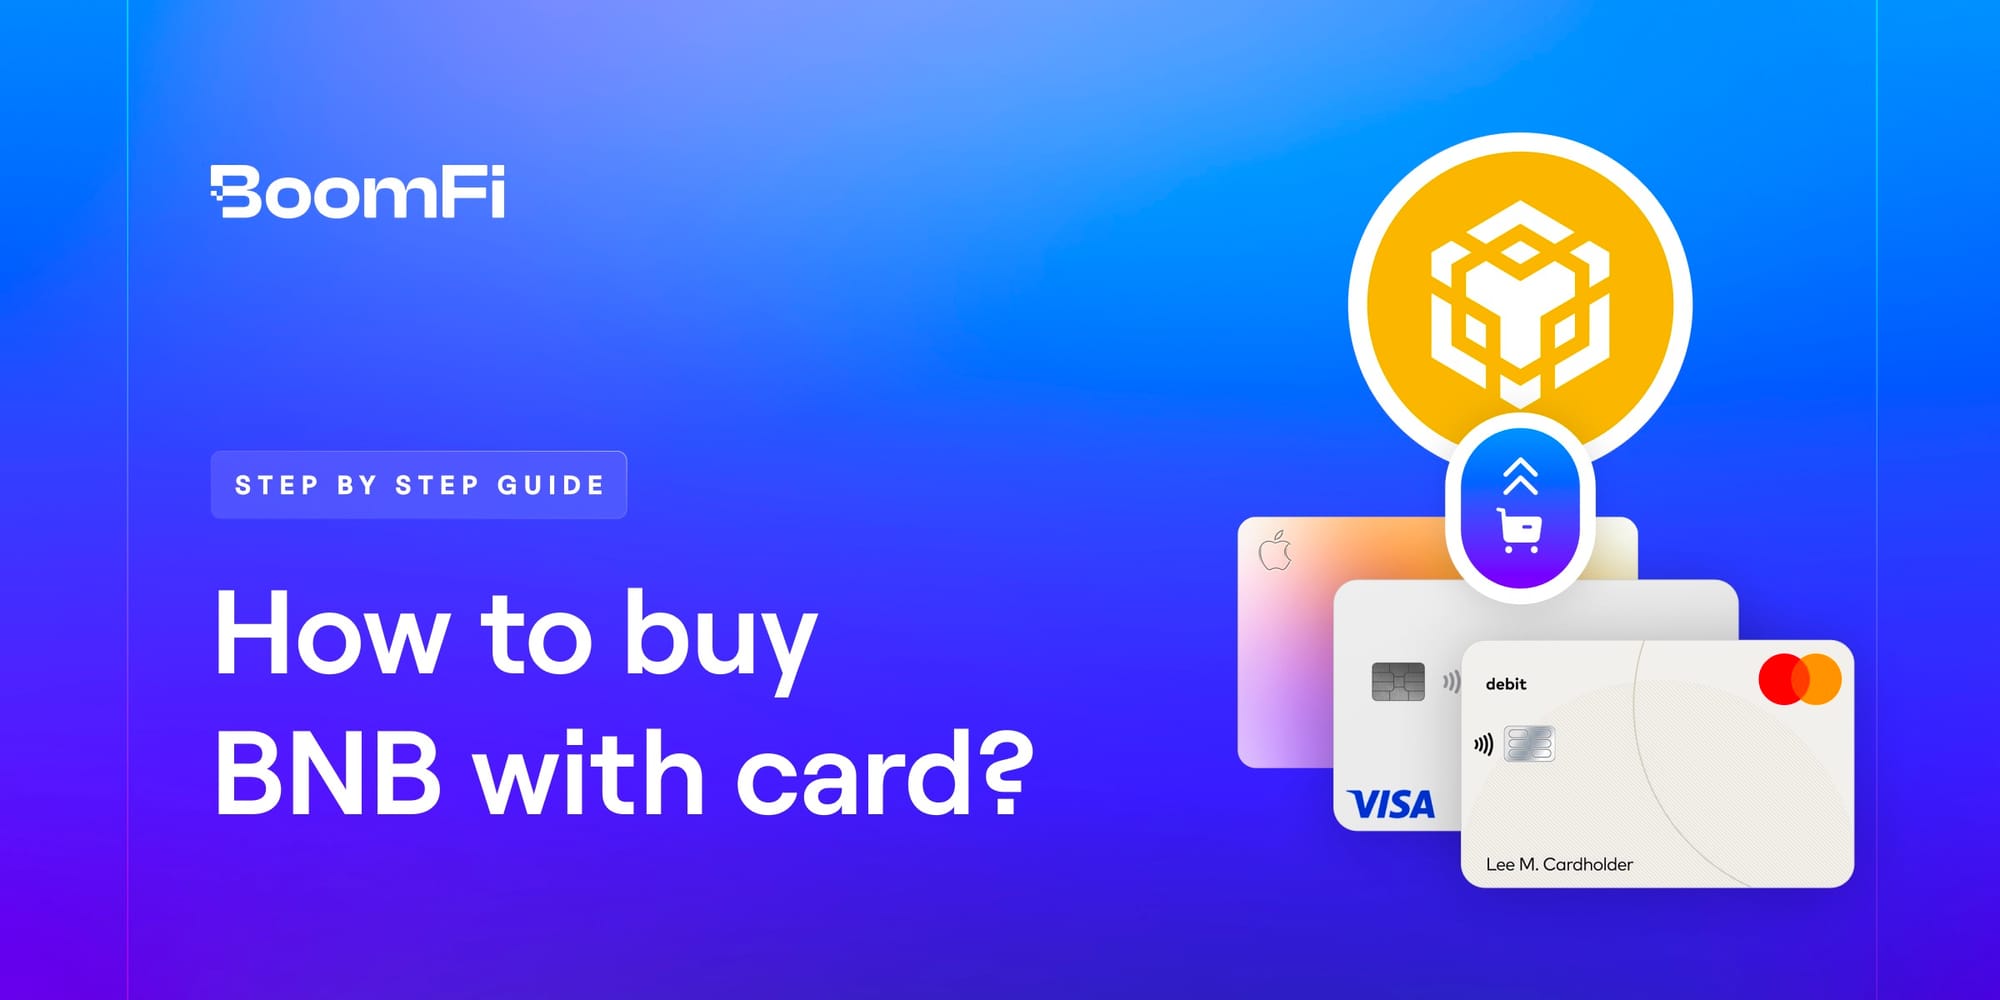 How to Buy BNB with a Credit or Debit Card